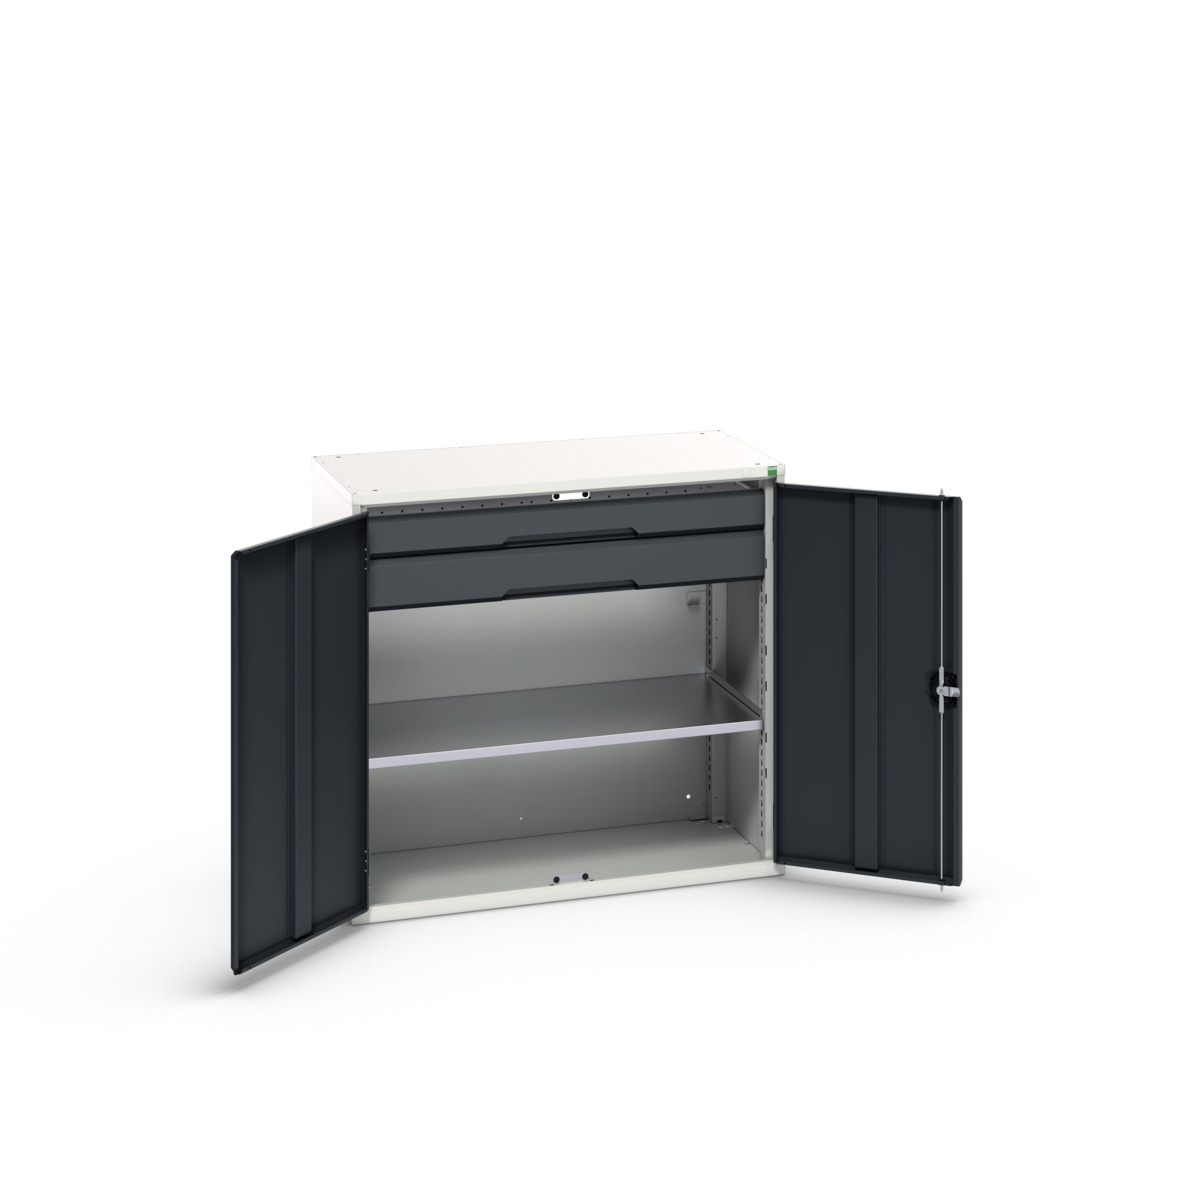 16926553.19 - verso kitted cupboard